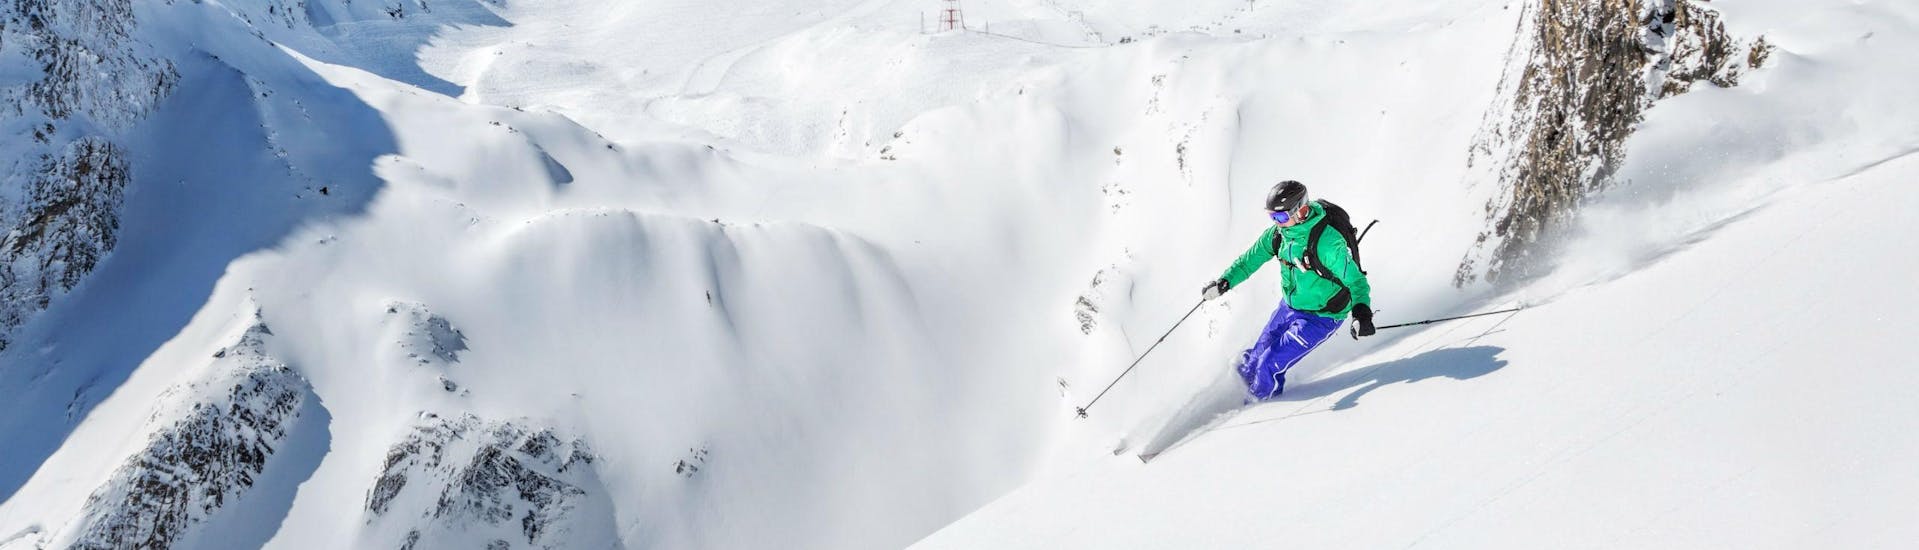 A skier is riding through some fresh powder snow in the Austrian ski resort of Kaprun, where beginners as well as advanced skiers can book ski lessons with the local ski schools.